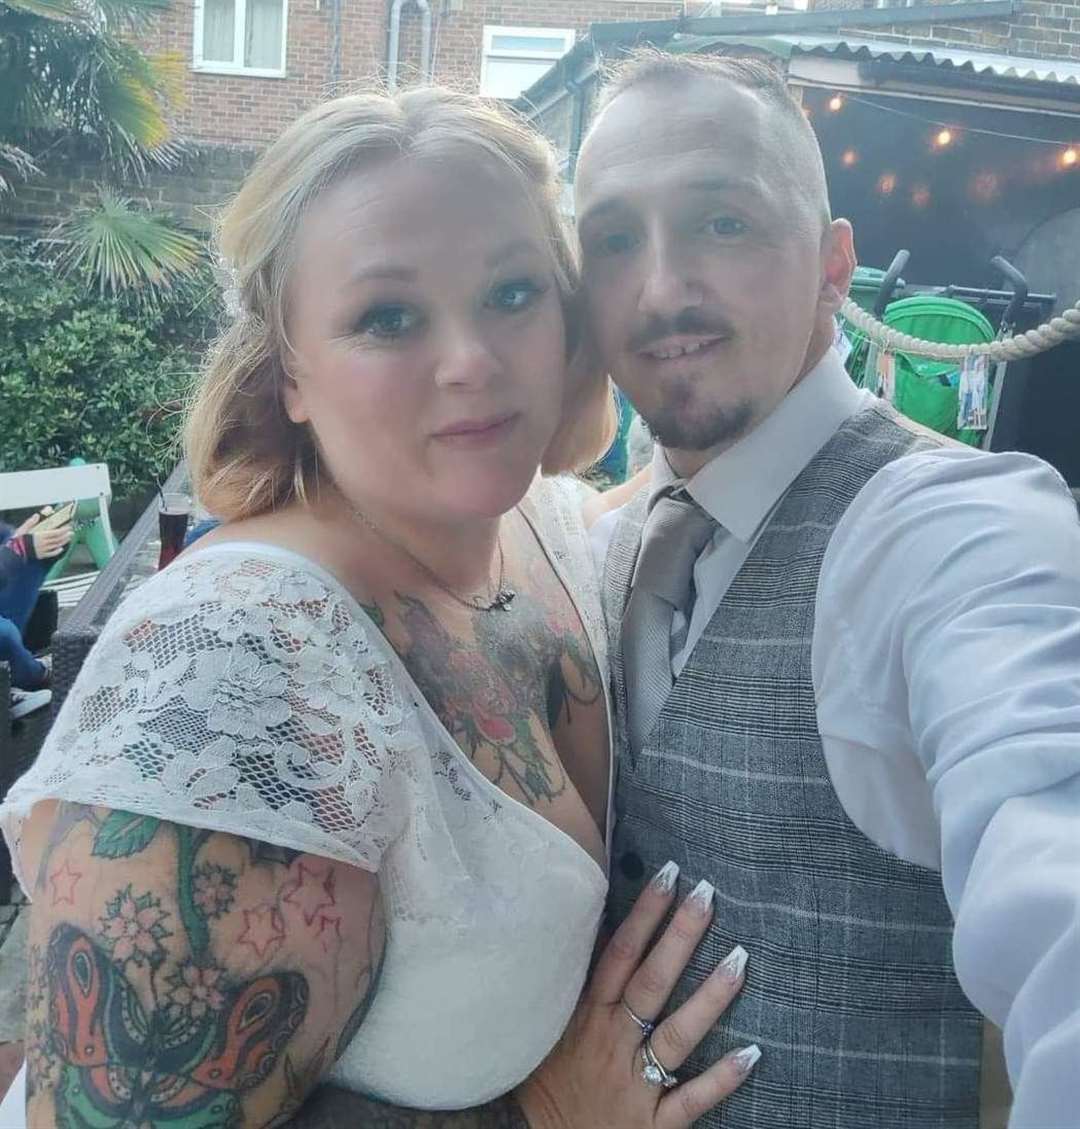 The newly-weds tied the knot after being together for a year